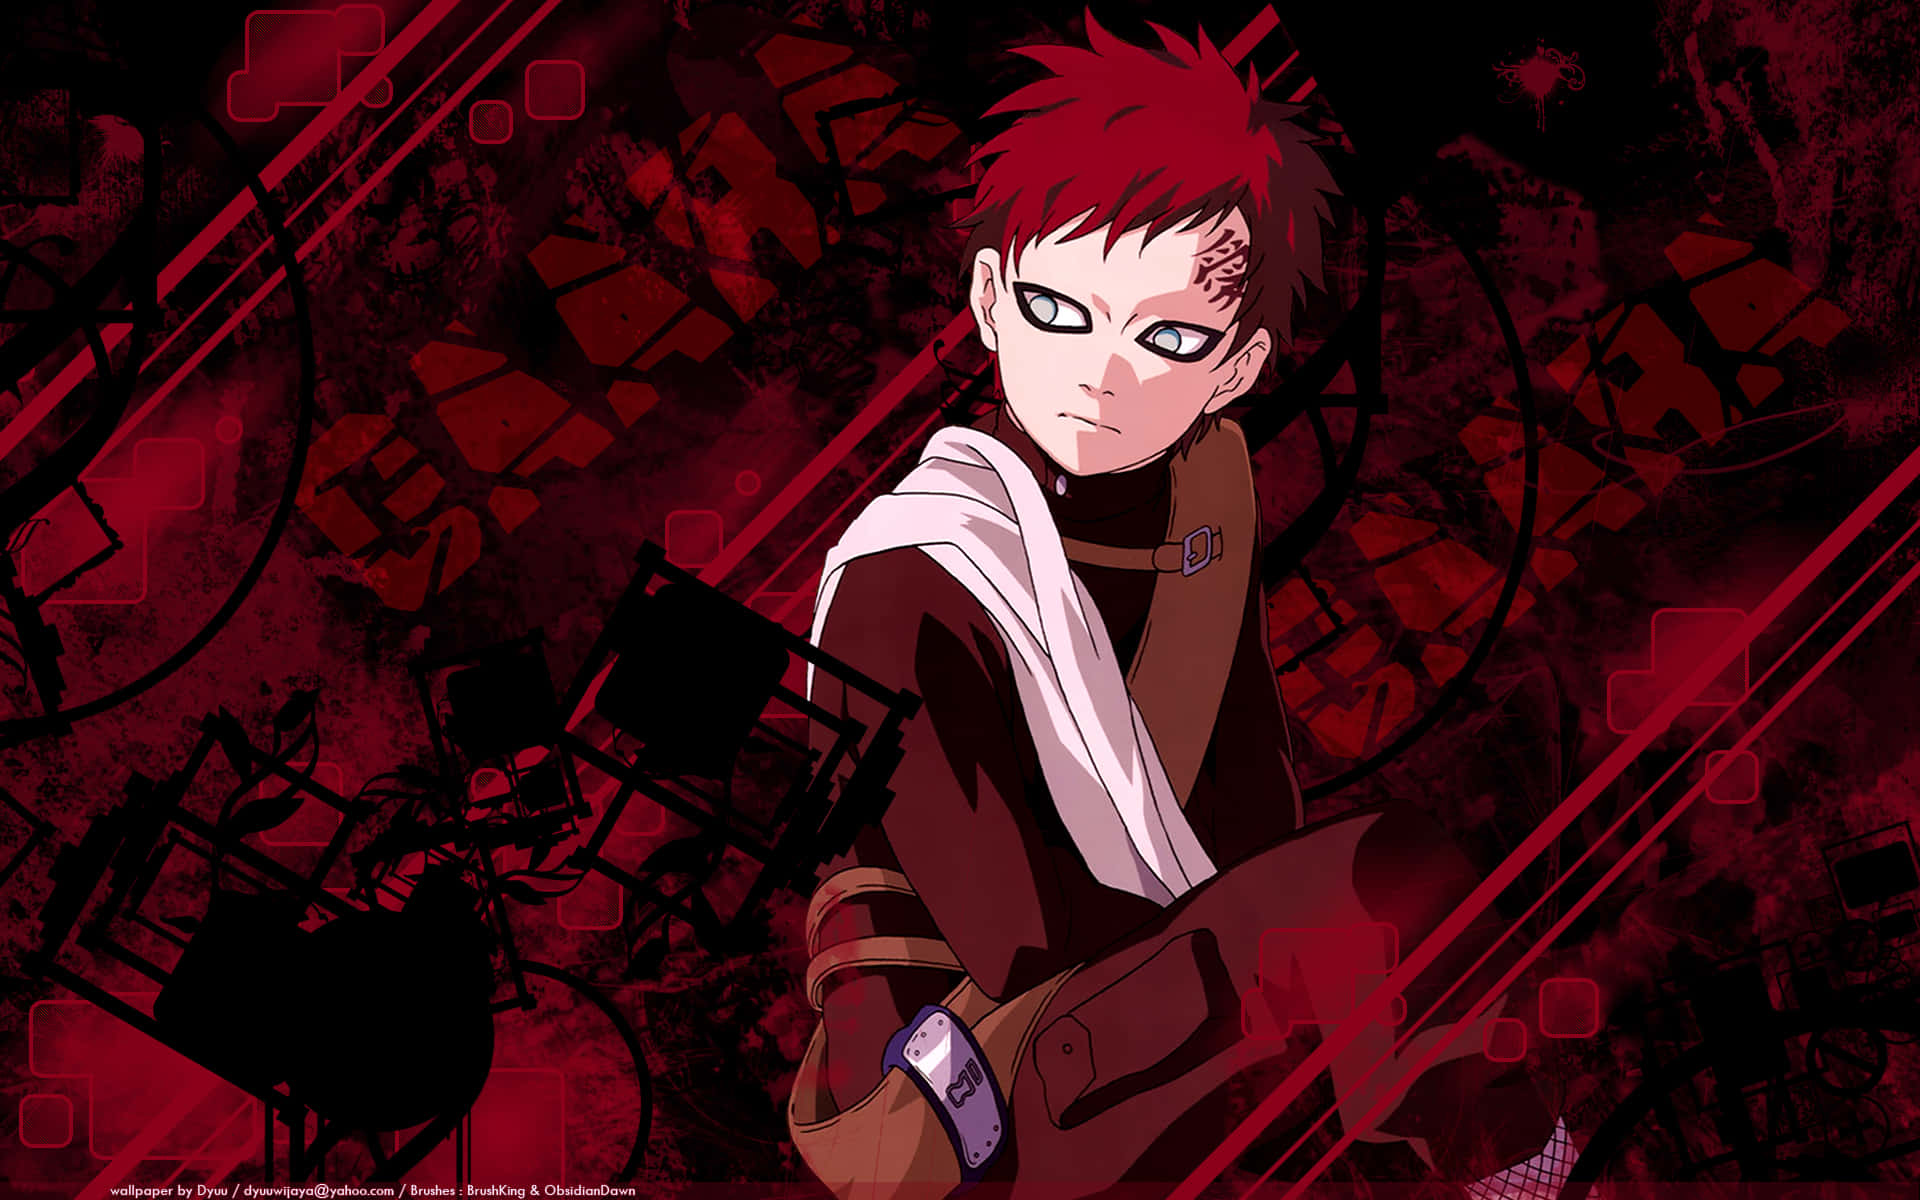 Young Gaara Art In Red Naruto Anime Wallpaper